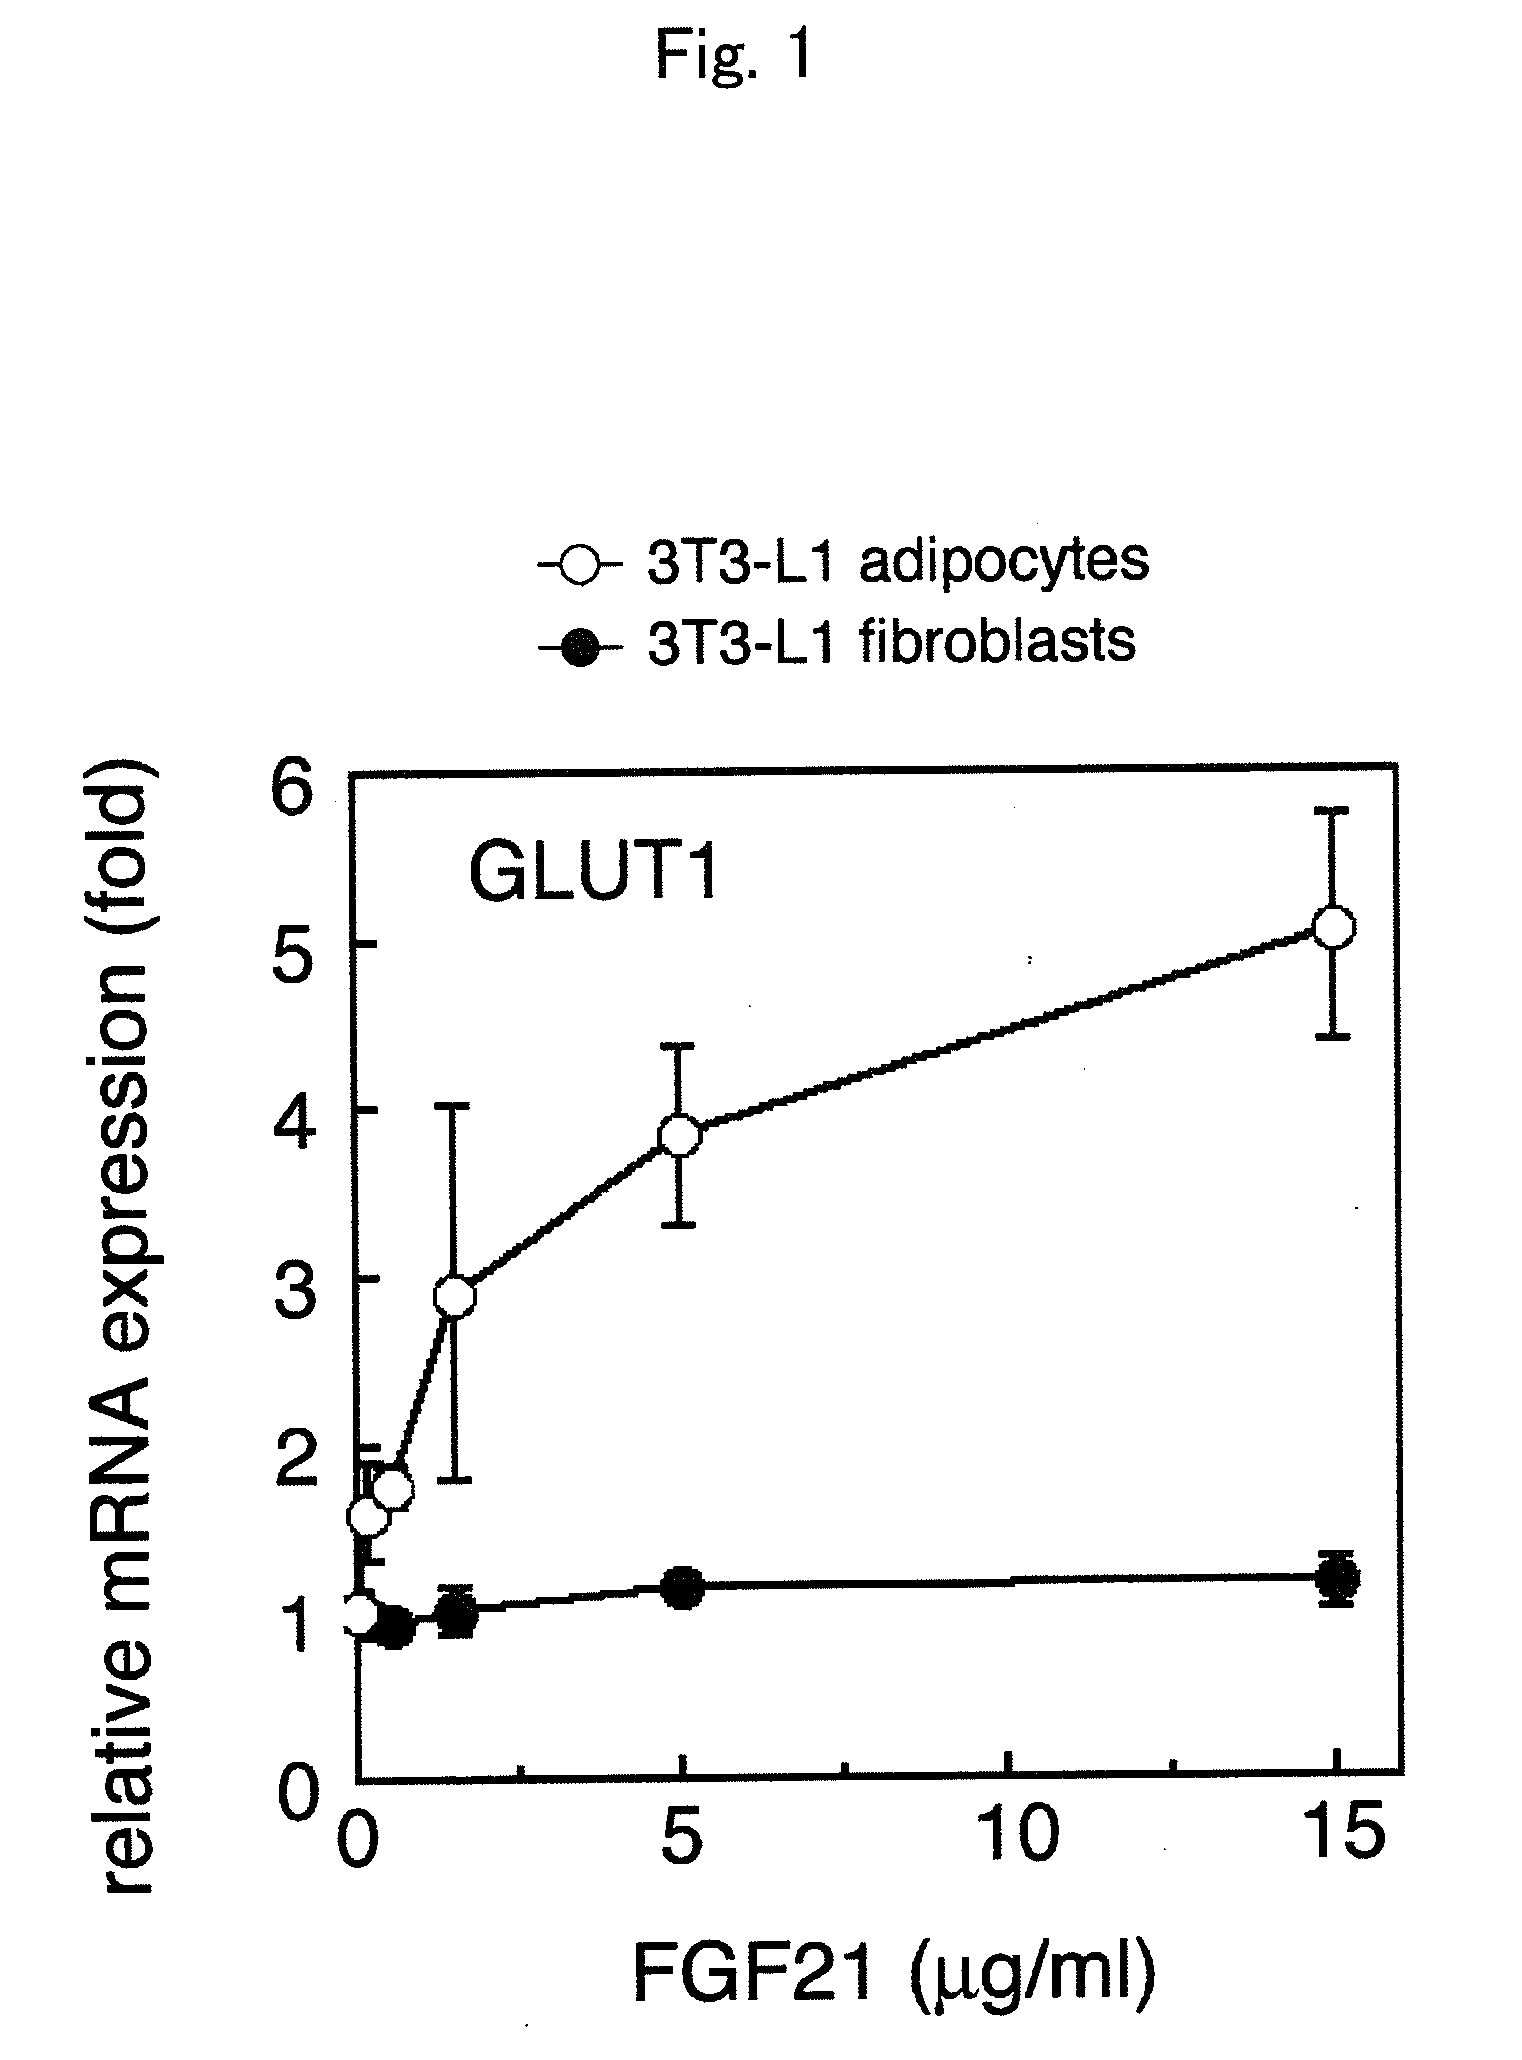 Method for activating receptor by cofactor and method for utilizing ligand activity